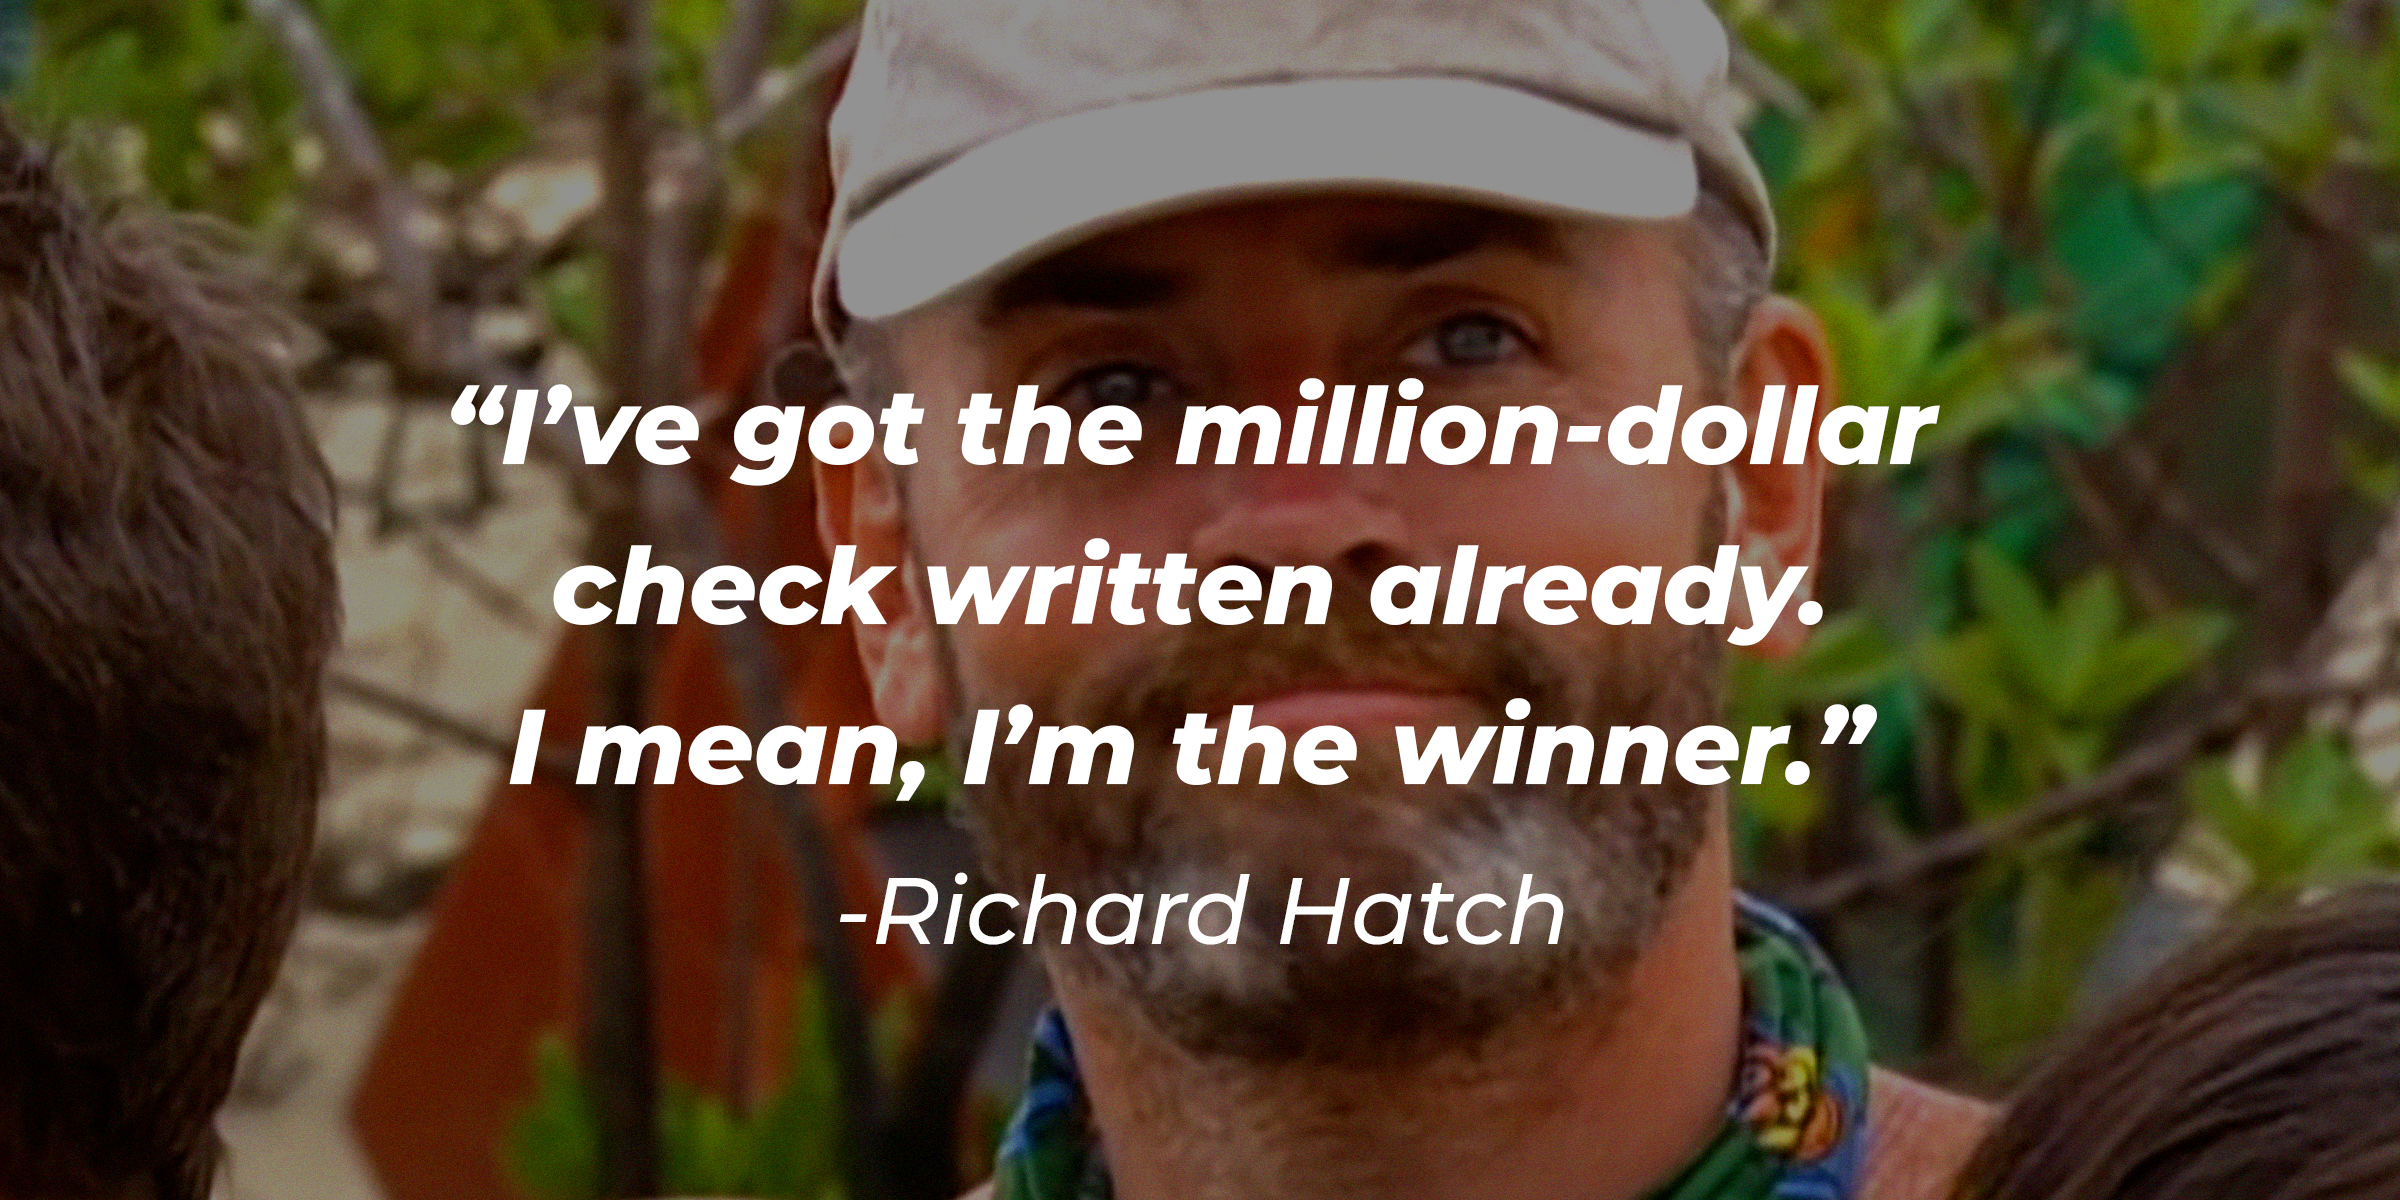 Richard Hatch, with his quote: “I’ve got the million-dollar check written already. I mean, I’m the winner.” │Source: facebook.com/Survivor